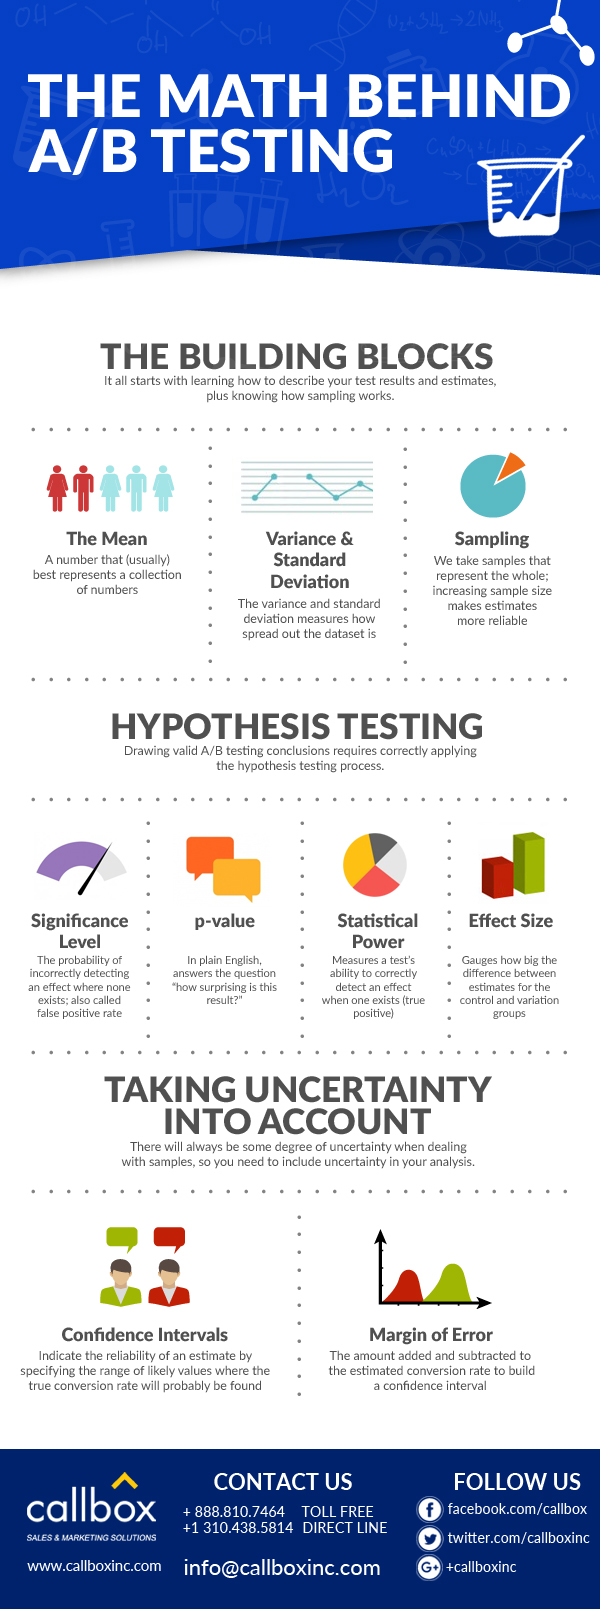 The Math Behind A/B Testing: A (Simplified) Visual Guide [INFOGRAPHIC]